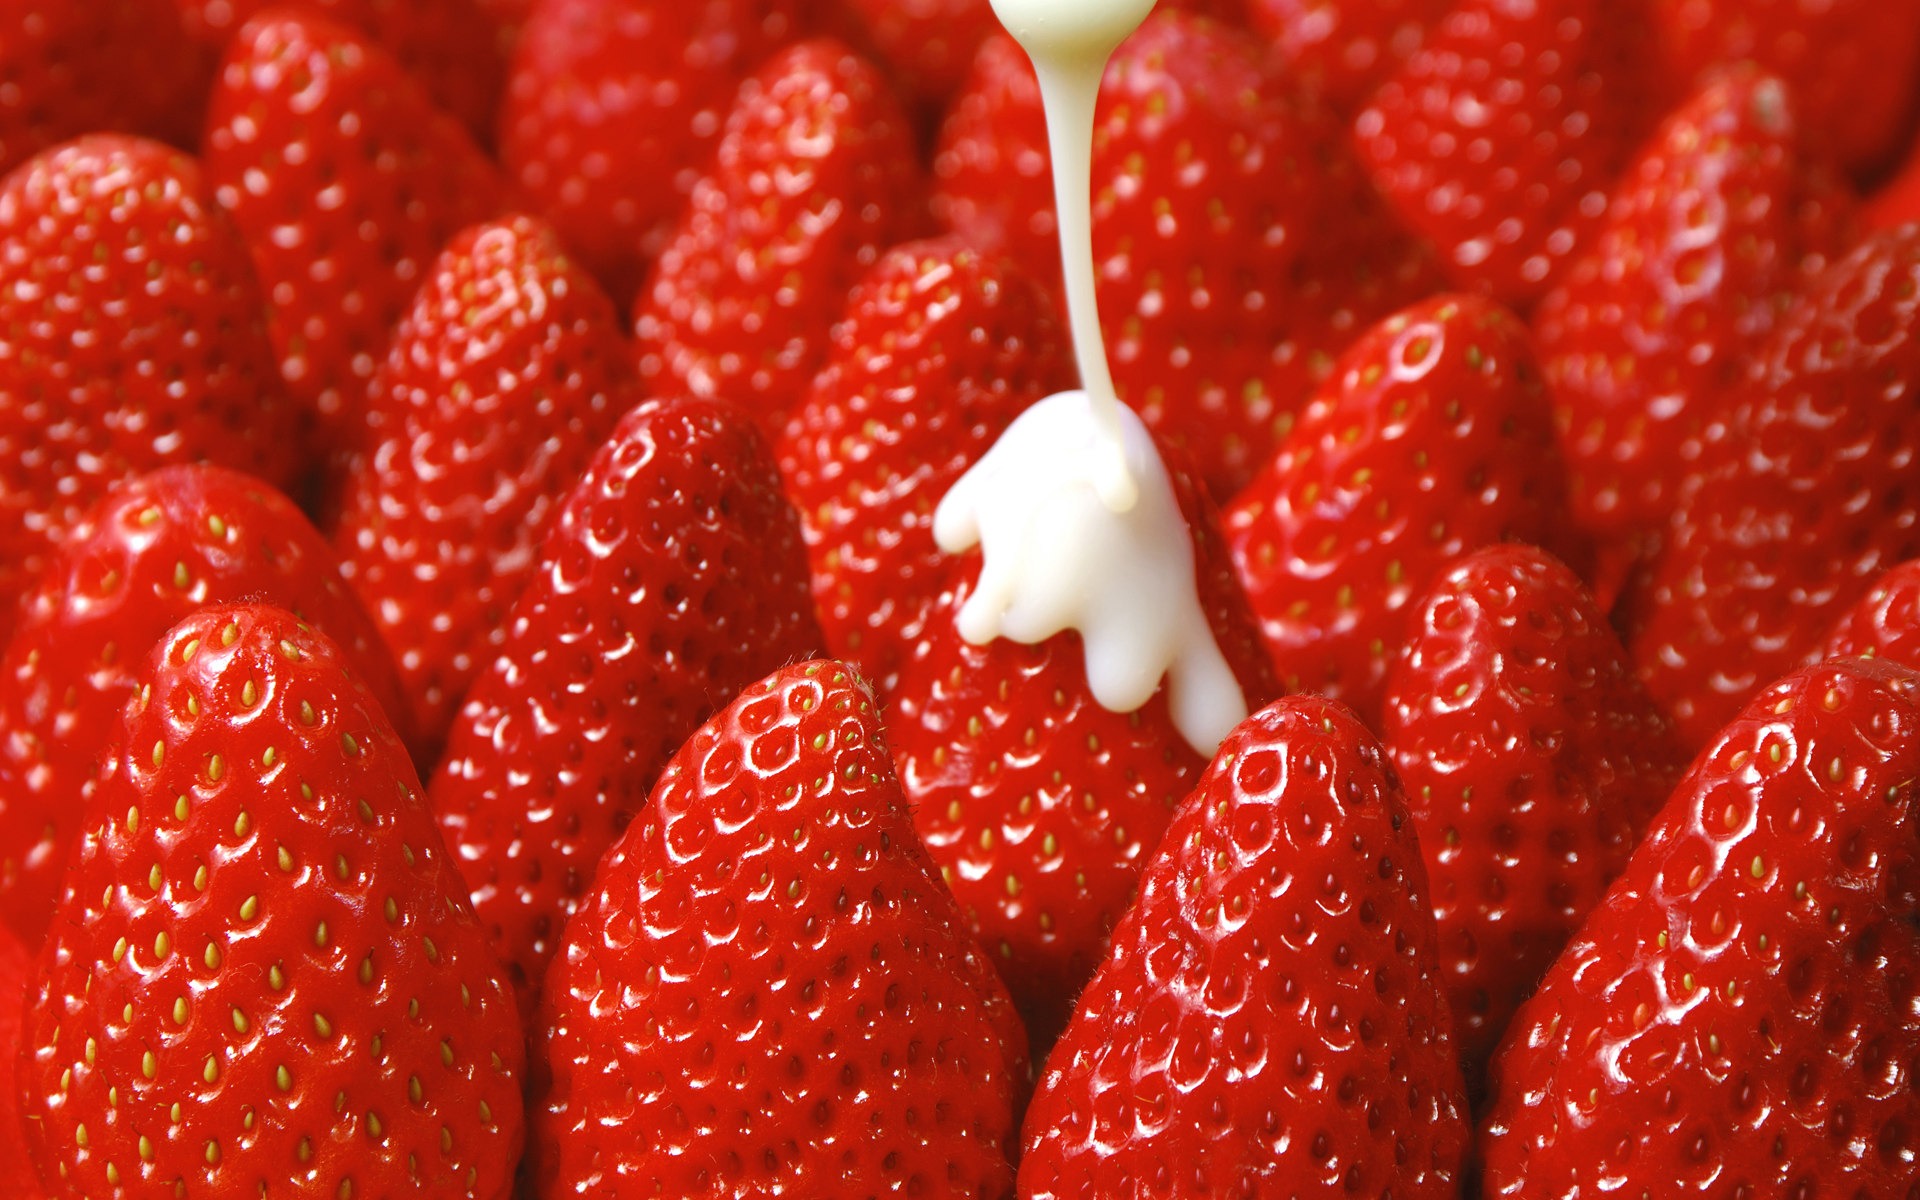 Many Strawberry Fruit Pictures